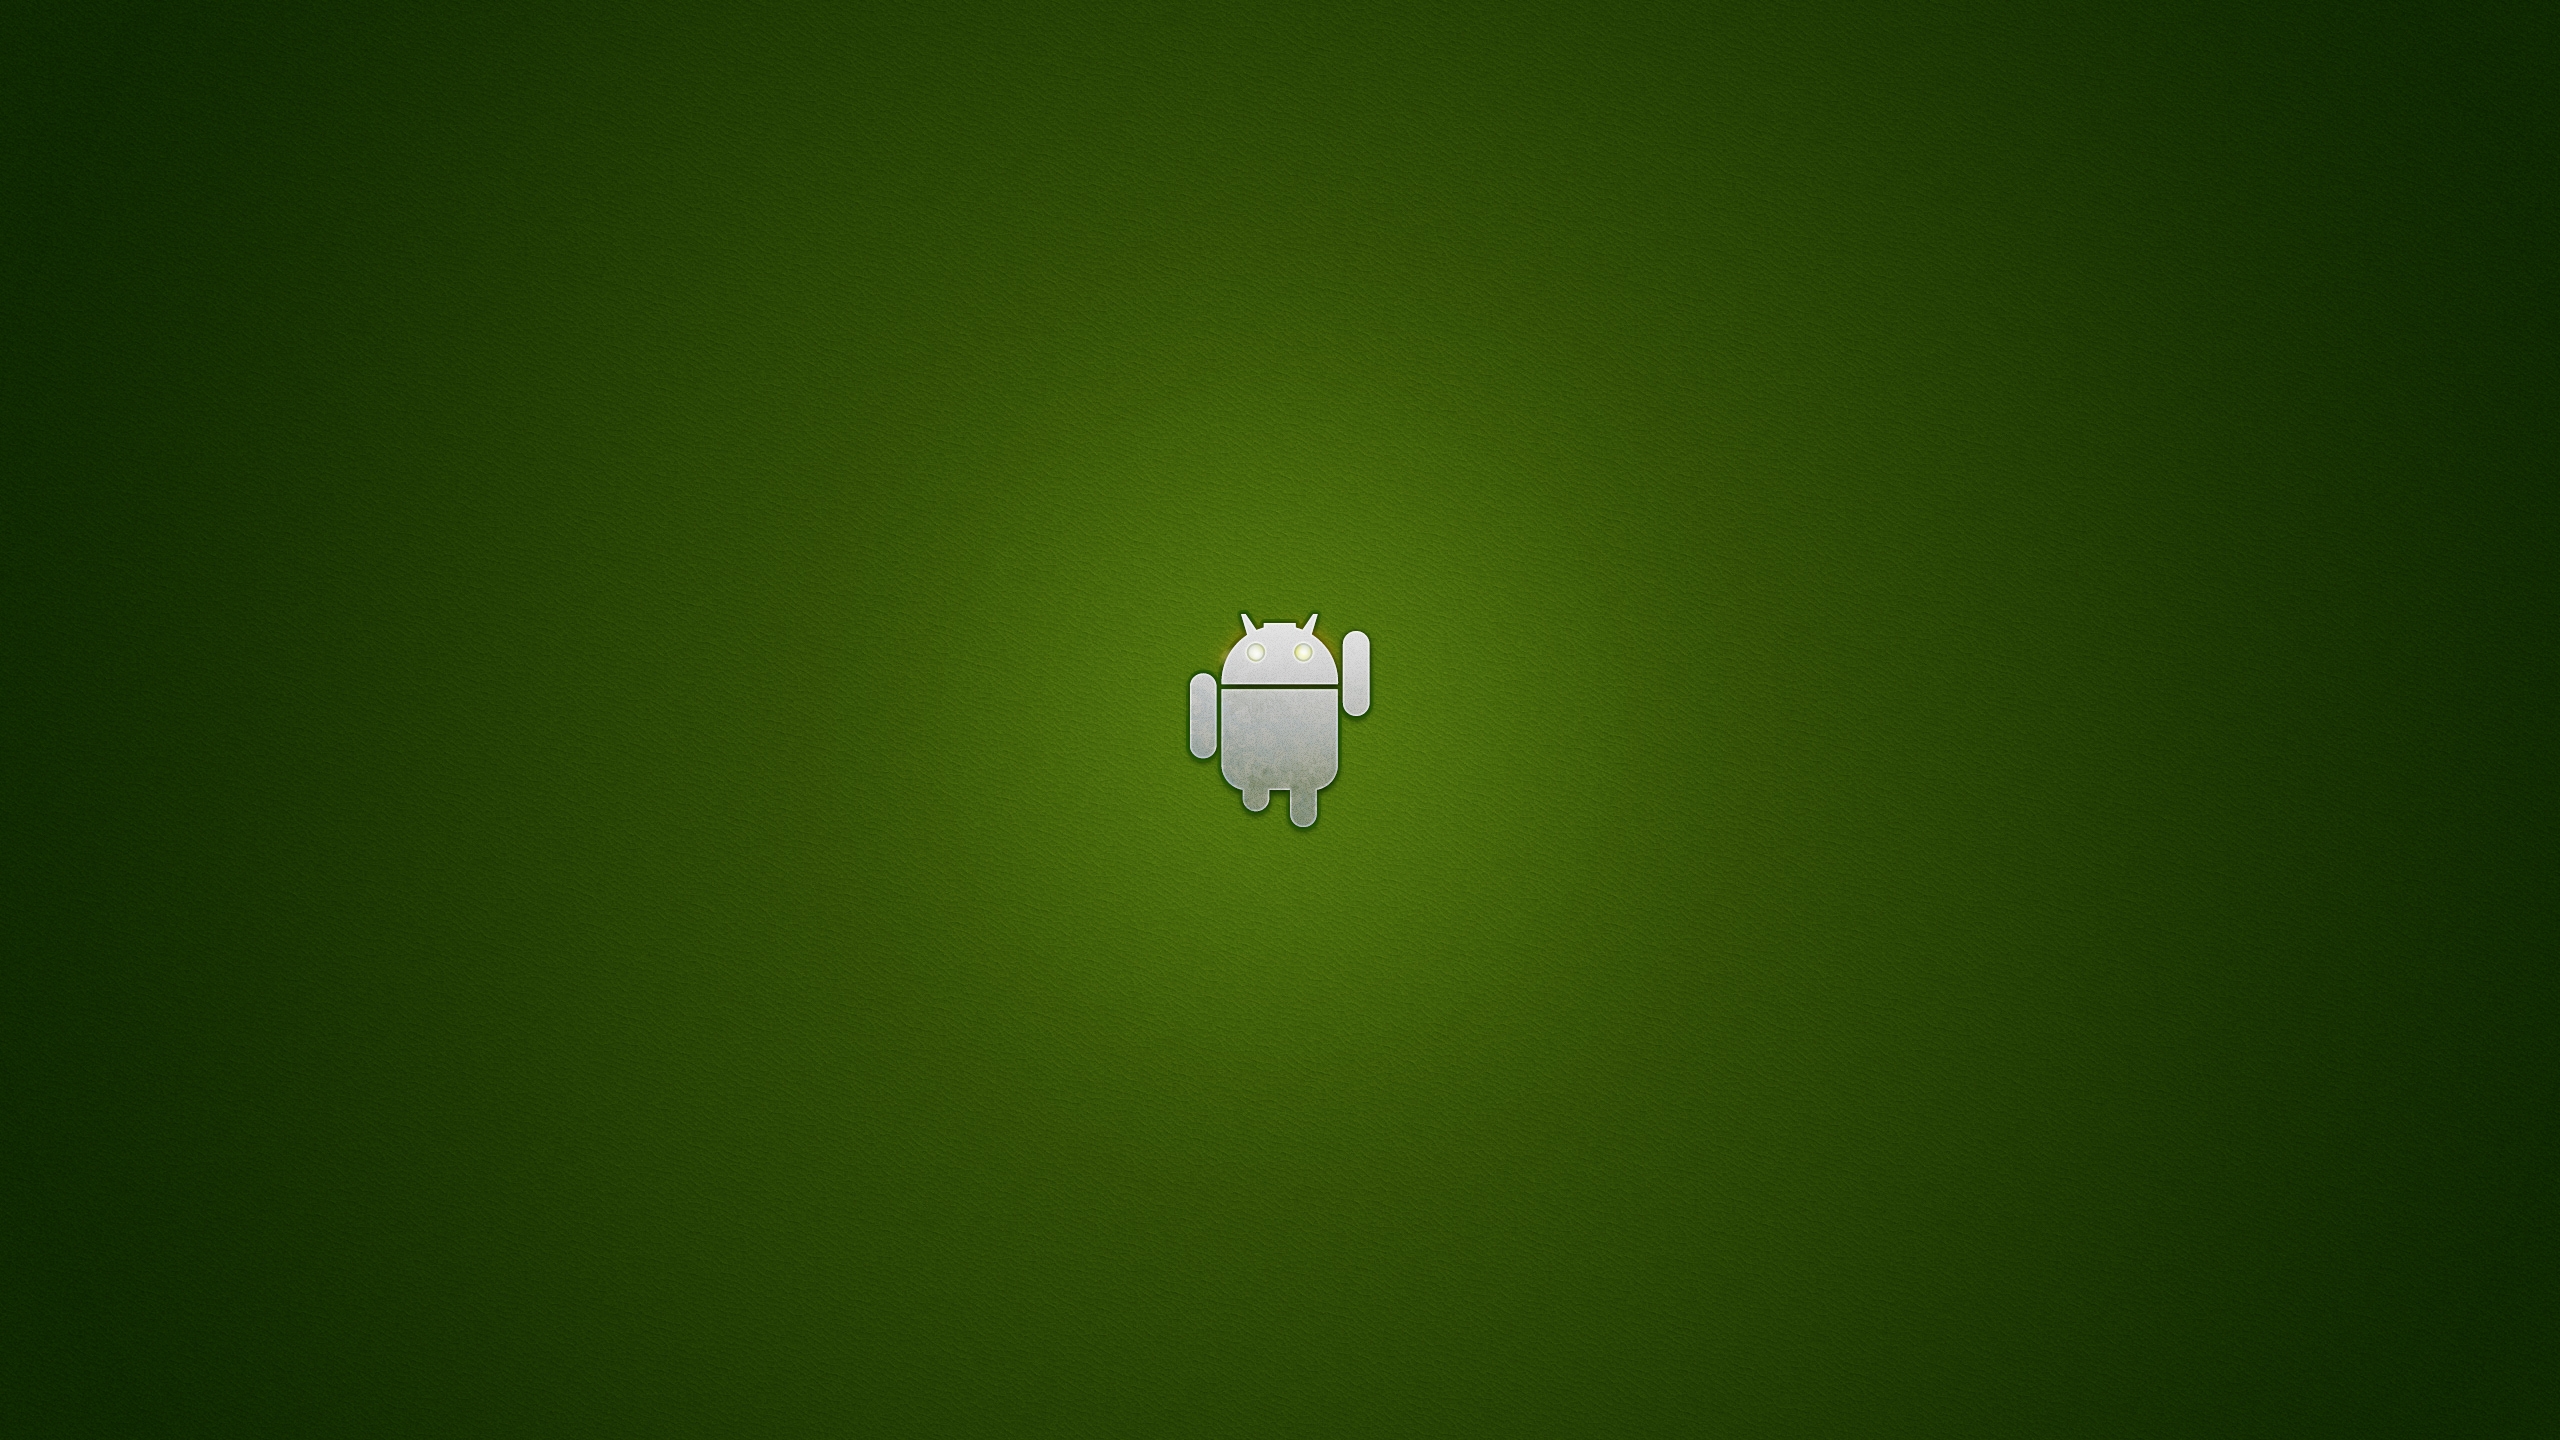 Just Android for 2560x1440 HDTV resolution